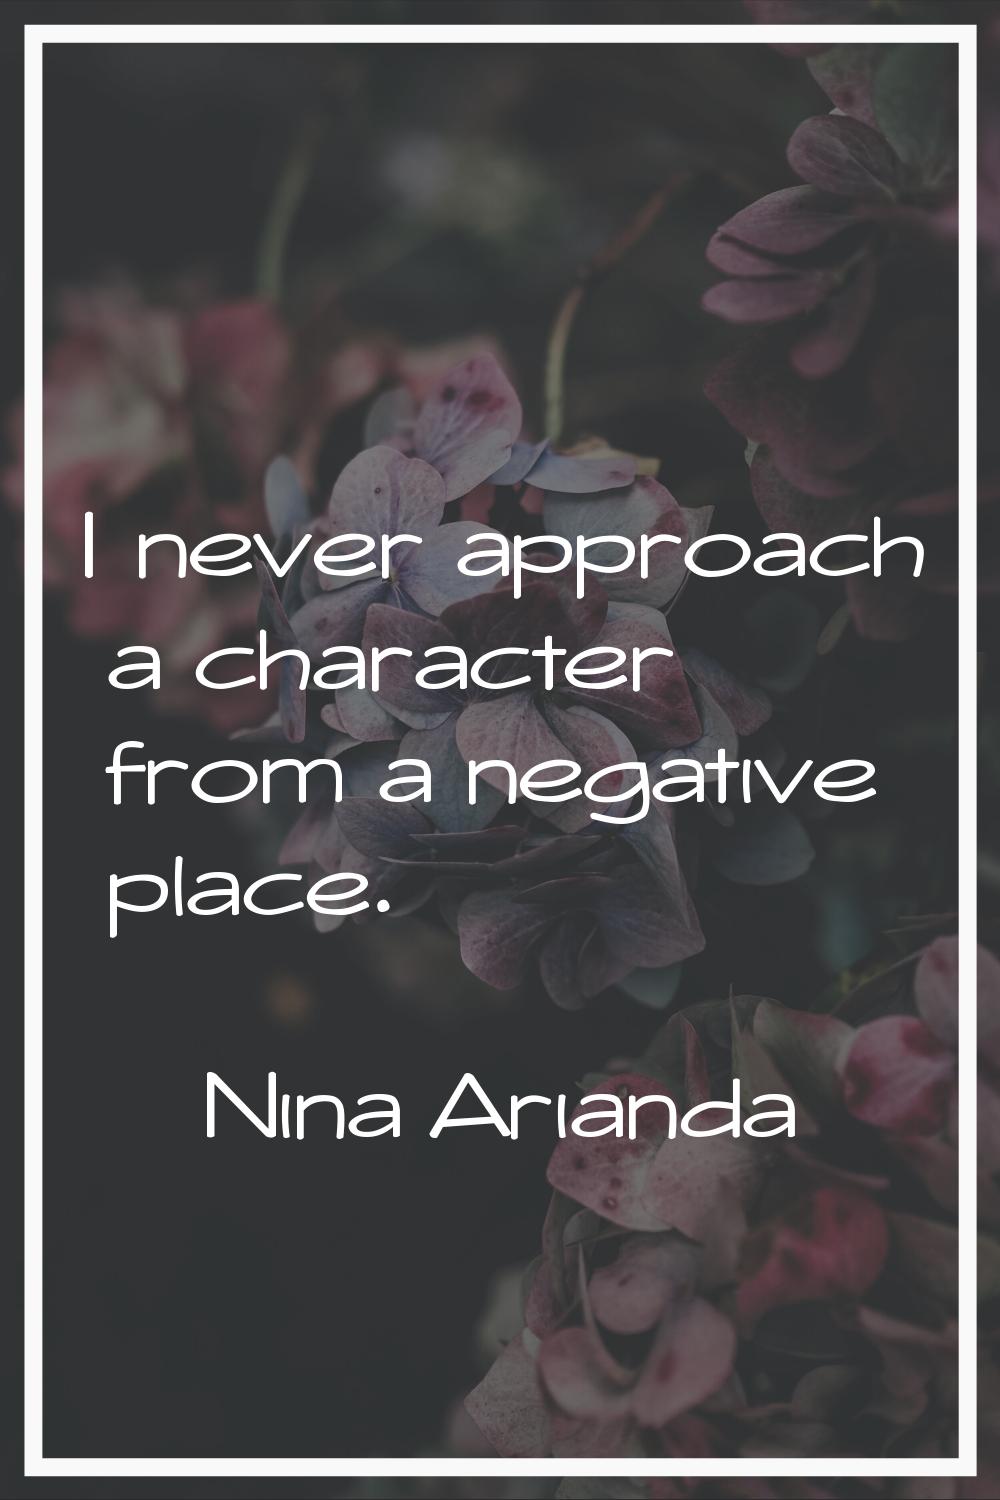 I never approach a character from a negative place.